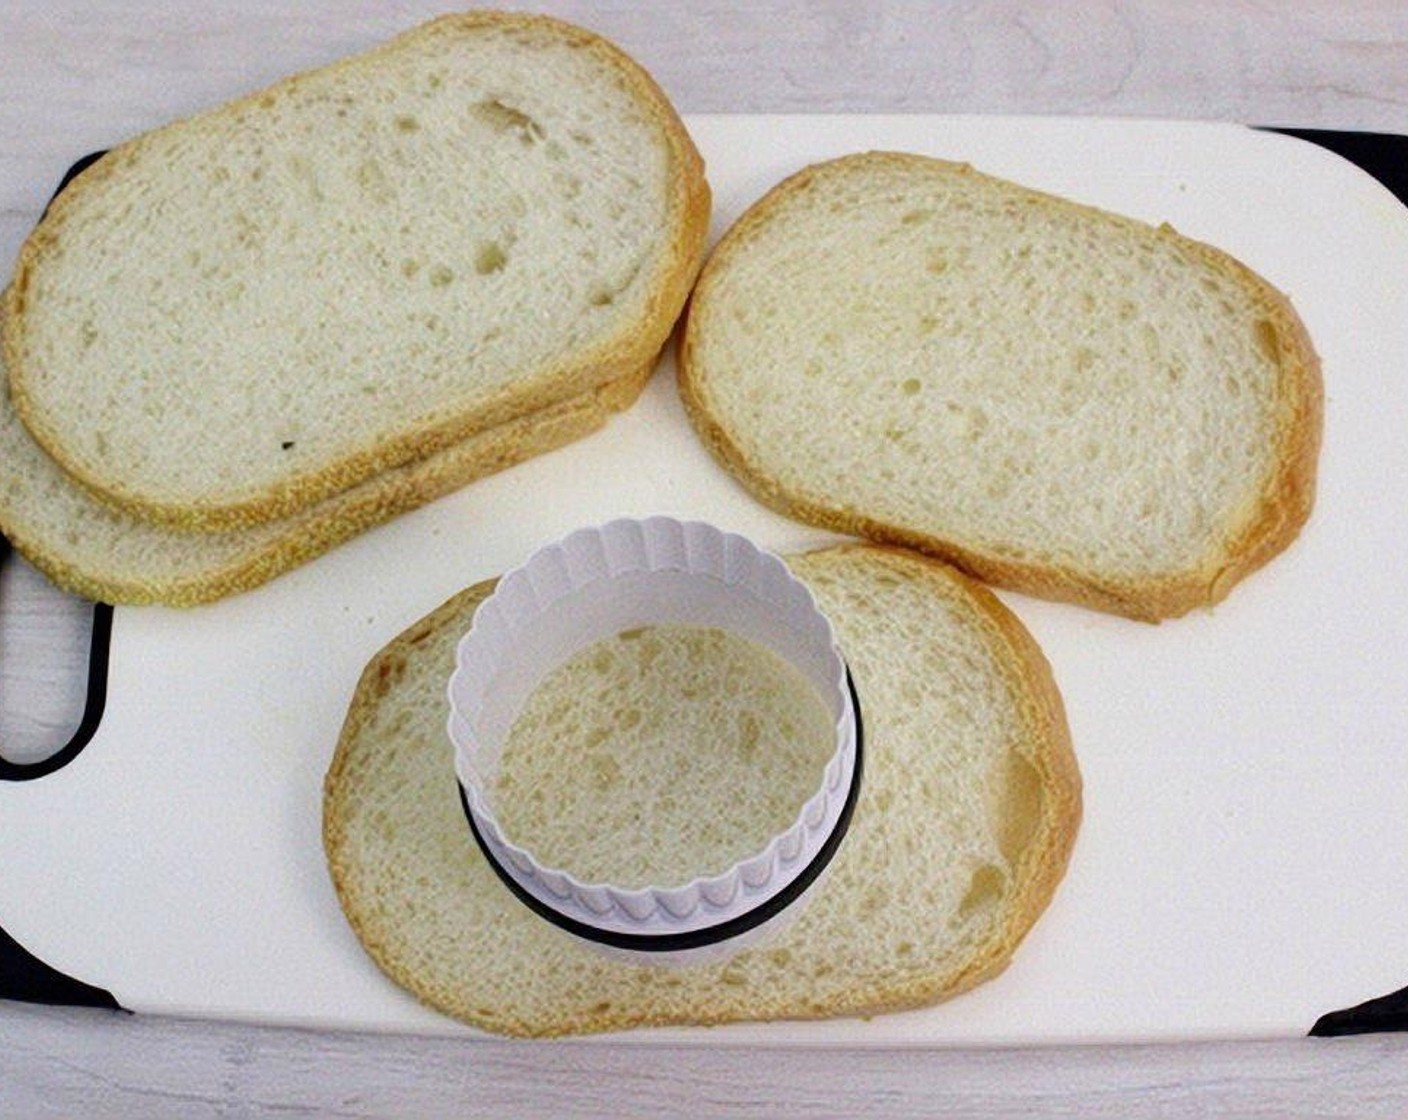 step 2 Cut out a hole from the center of each Bread (4 slices). You can use a biscuit cutter or simply scissors and knife.